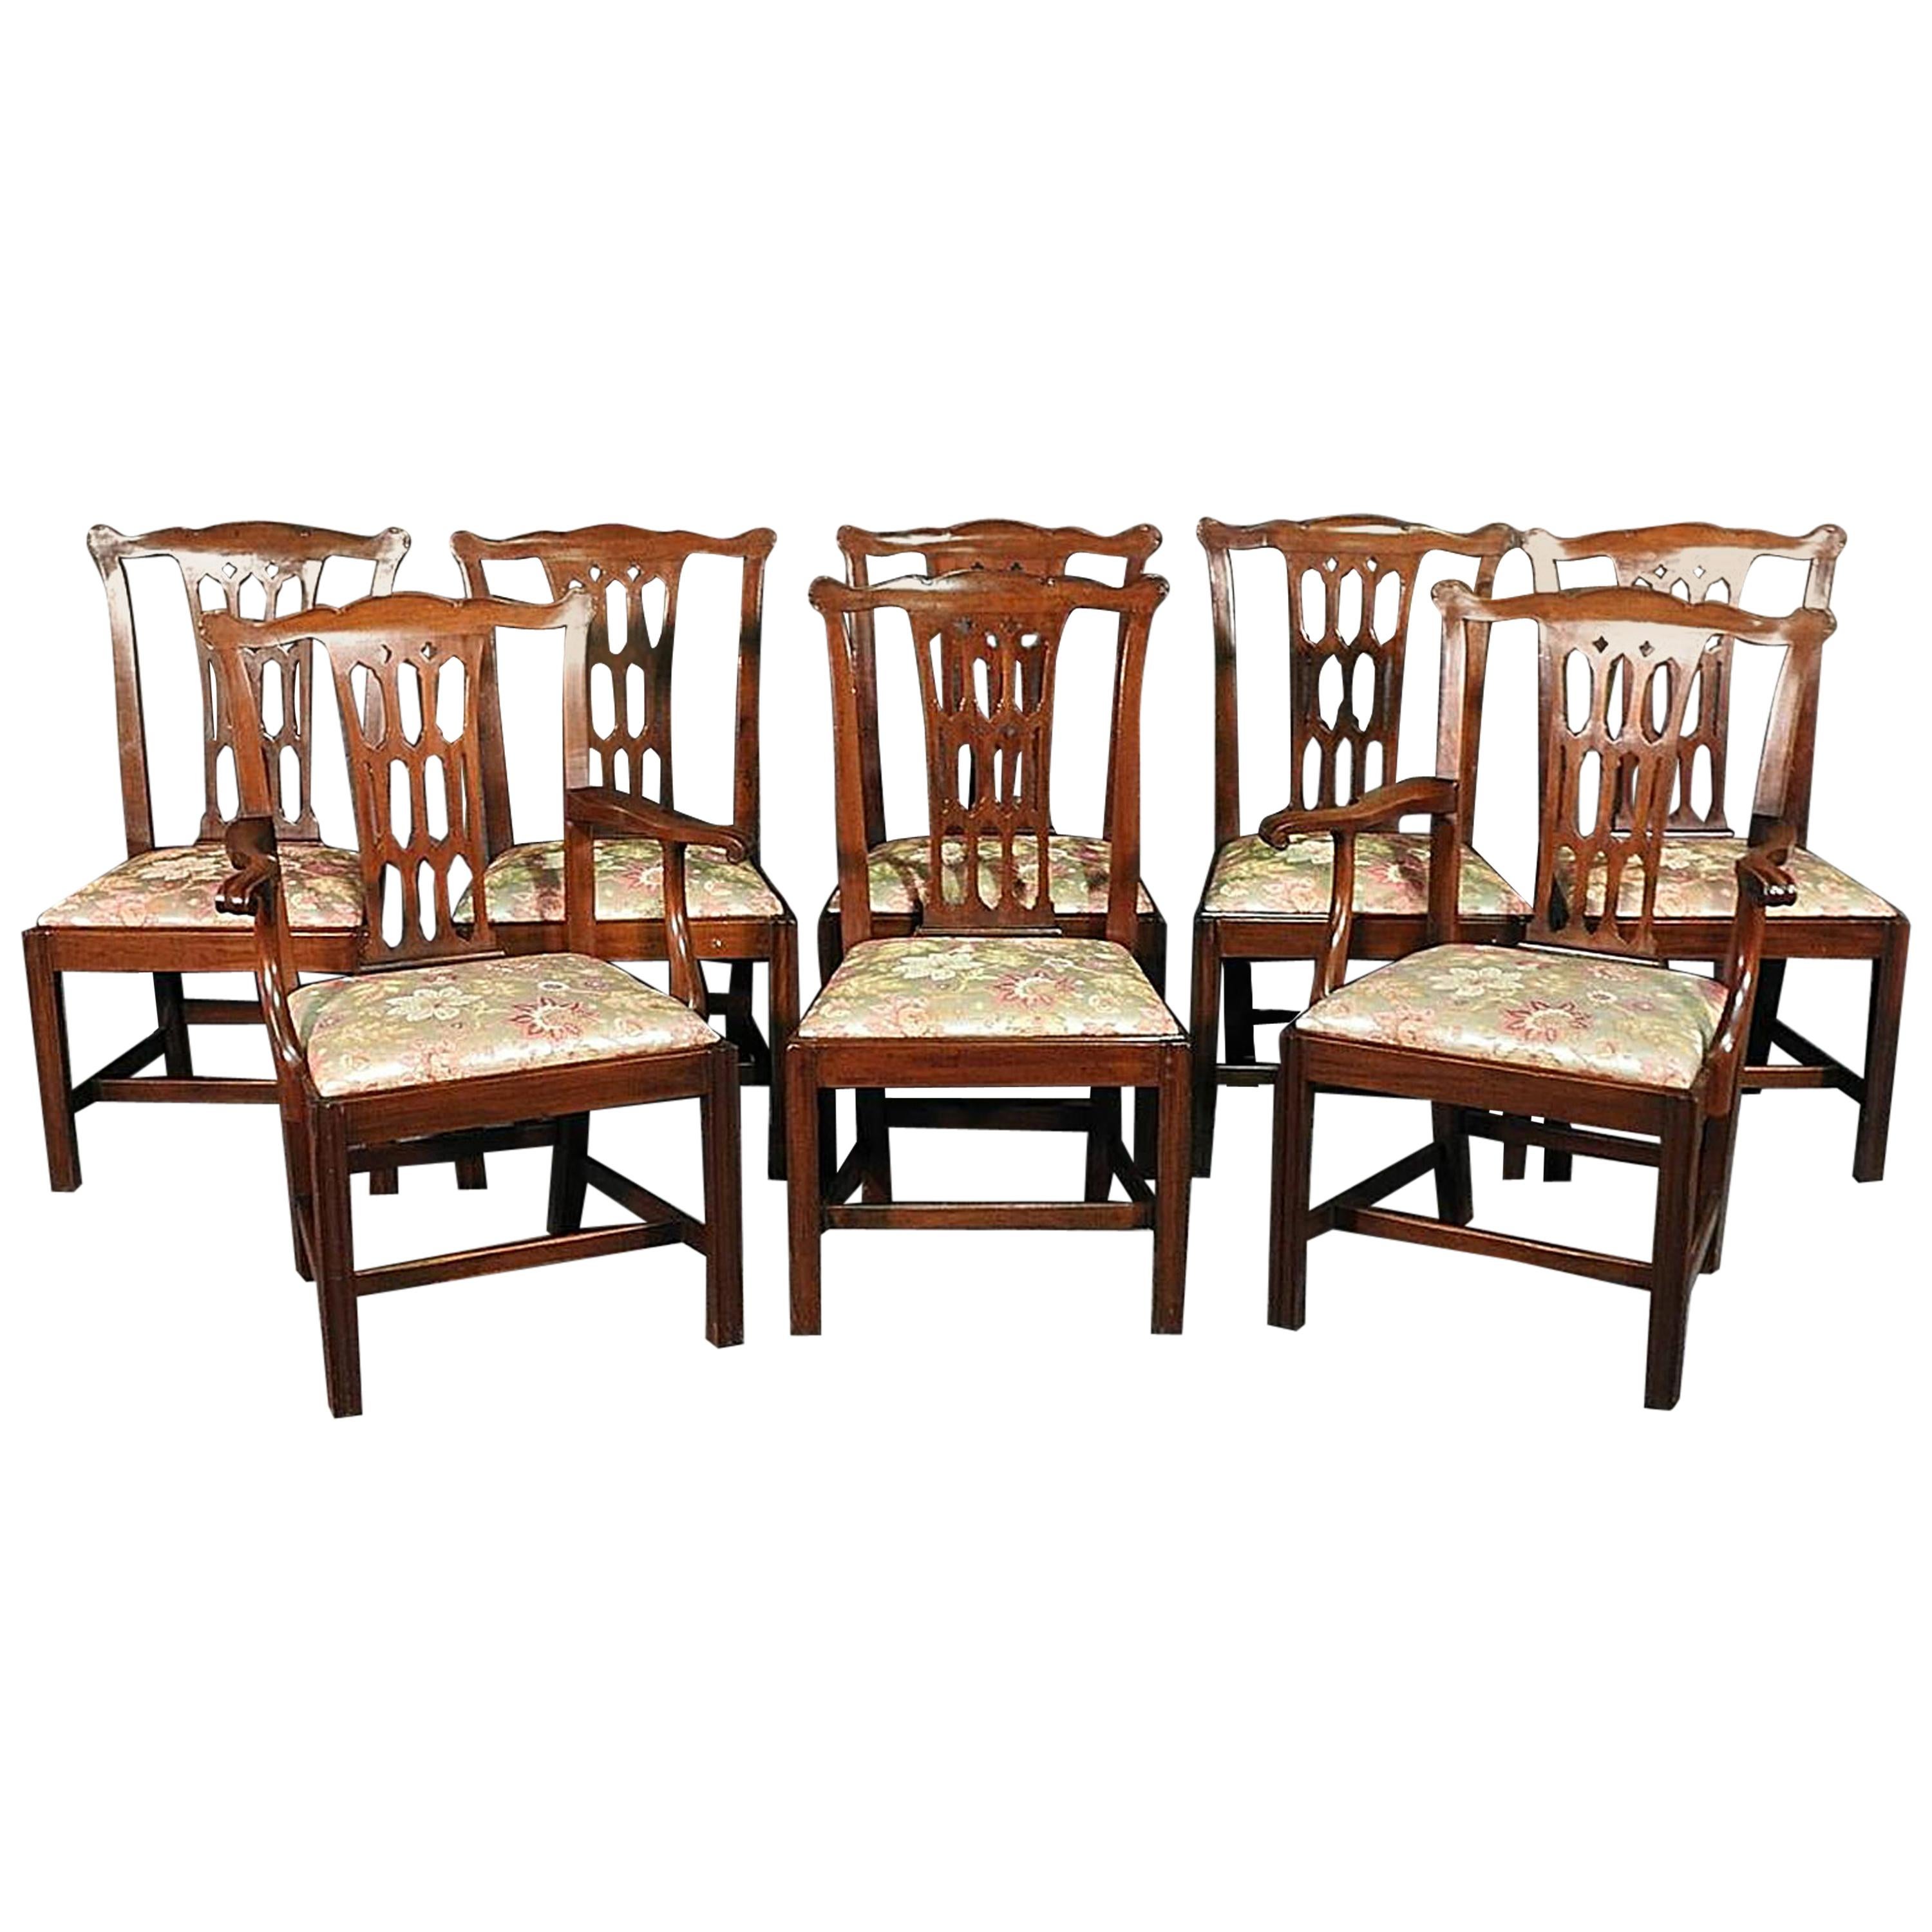 Set of 8 1880s Era Carved Mahogany Chippendale Dining Chairs, circa 1890